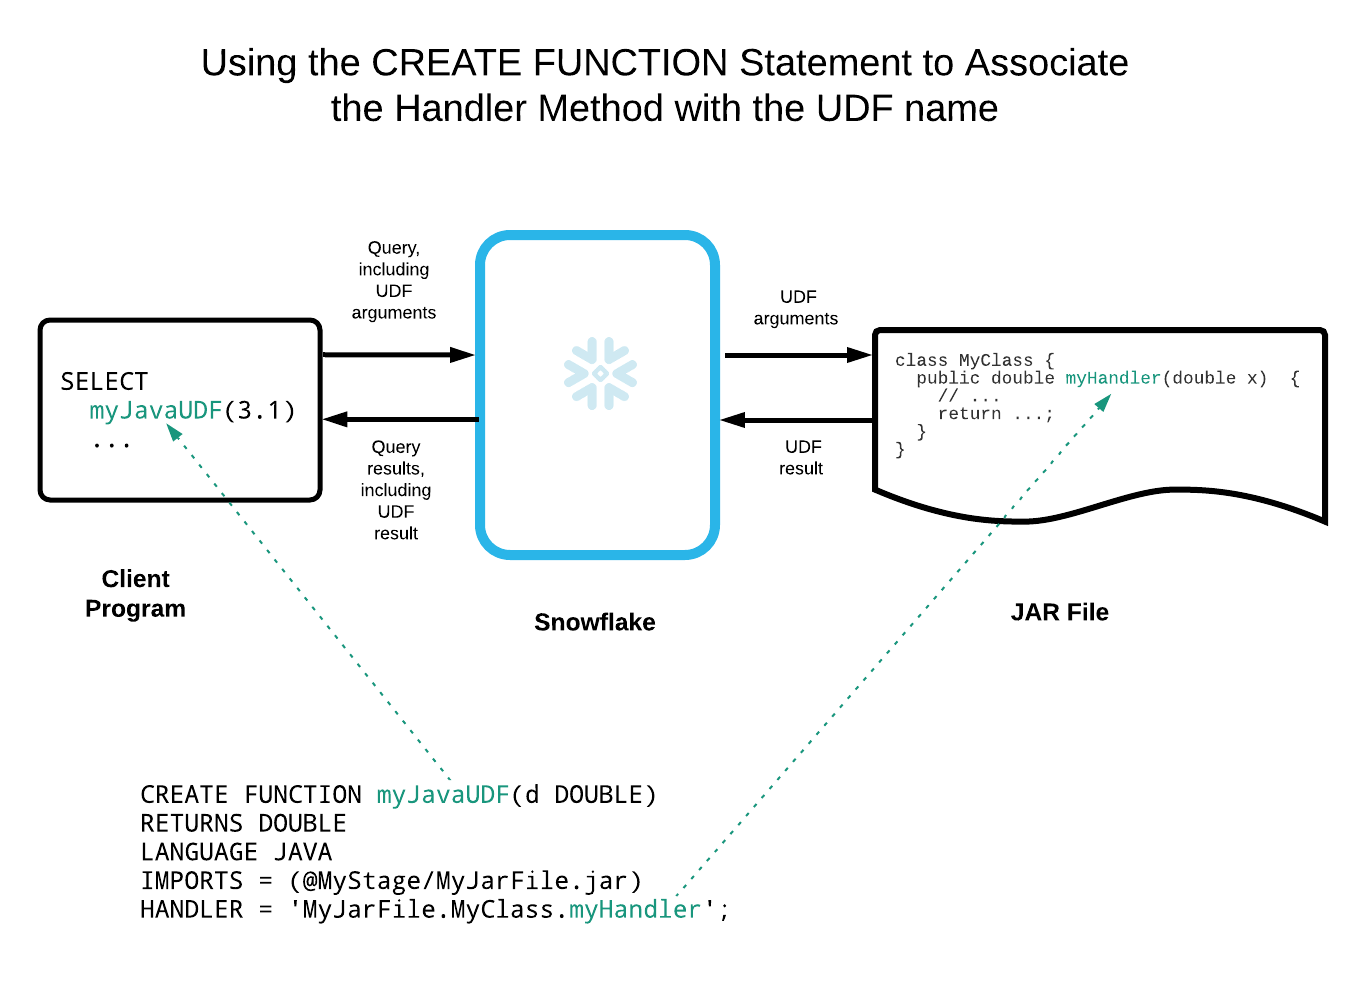 Using the CREATE FUNCTION Statement to Associate the Handler Method With the UDF Name